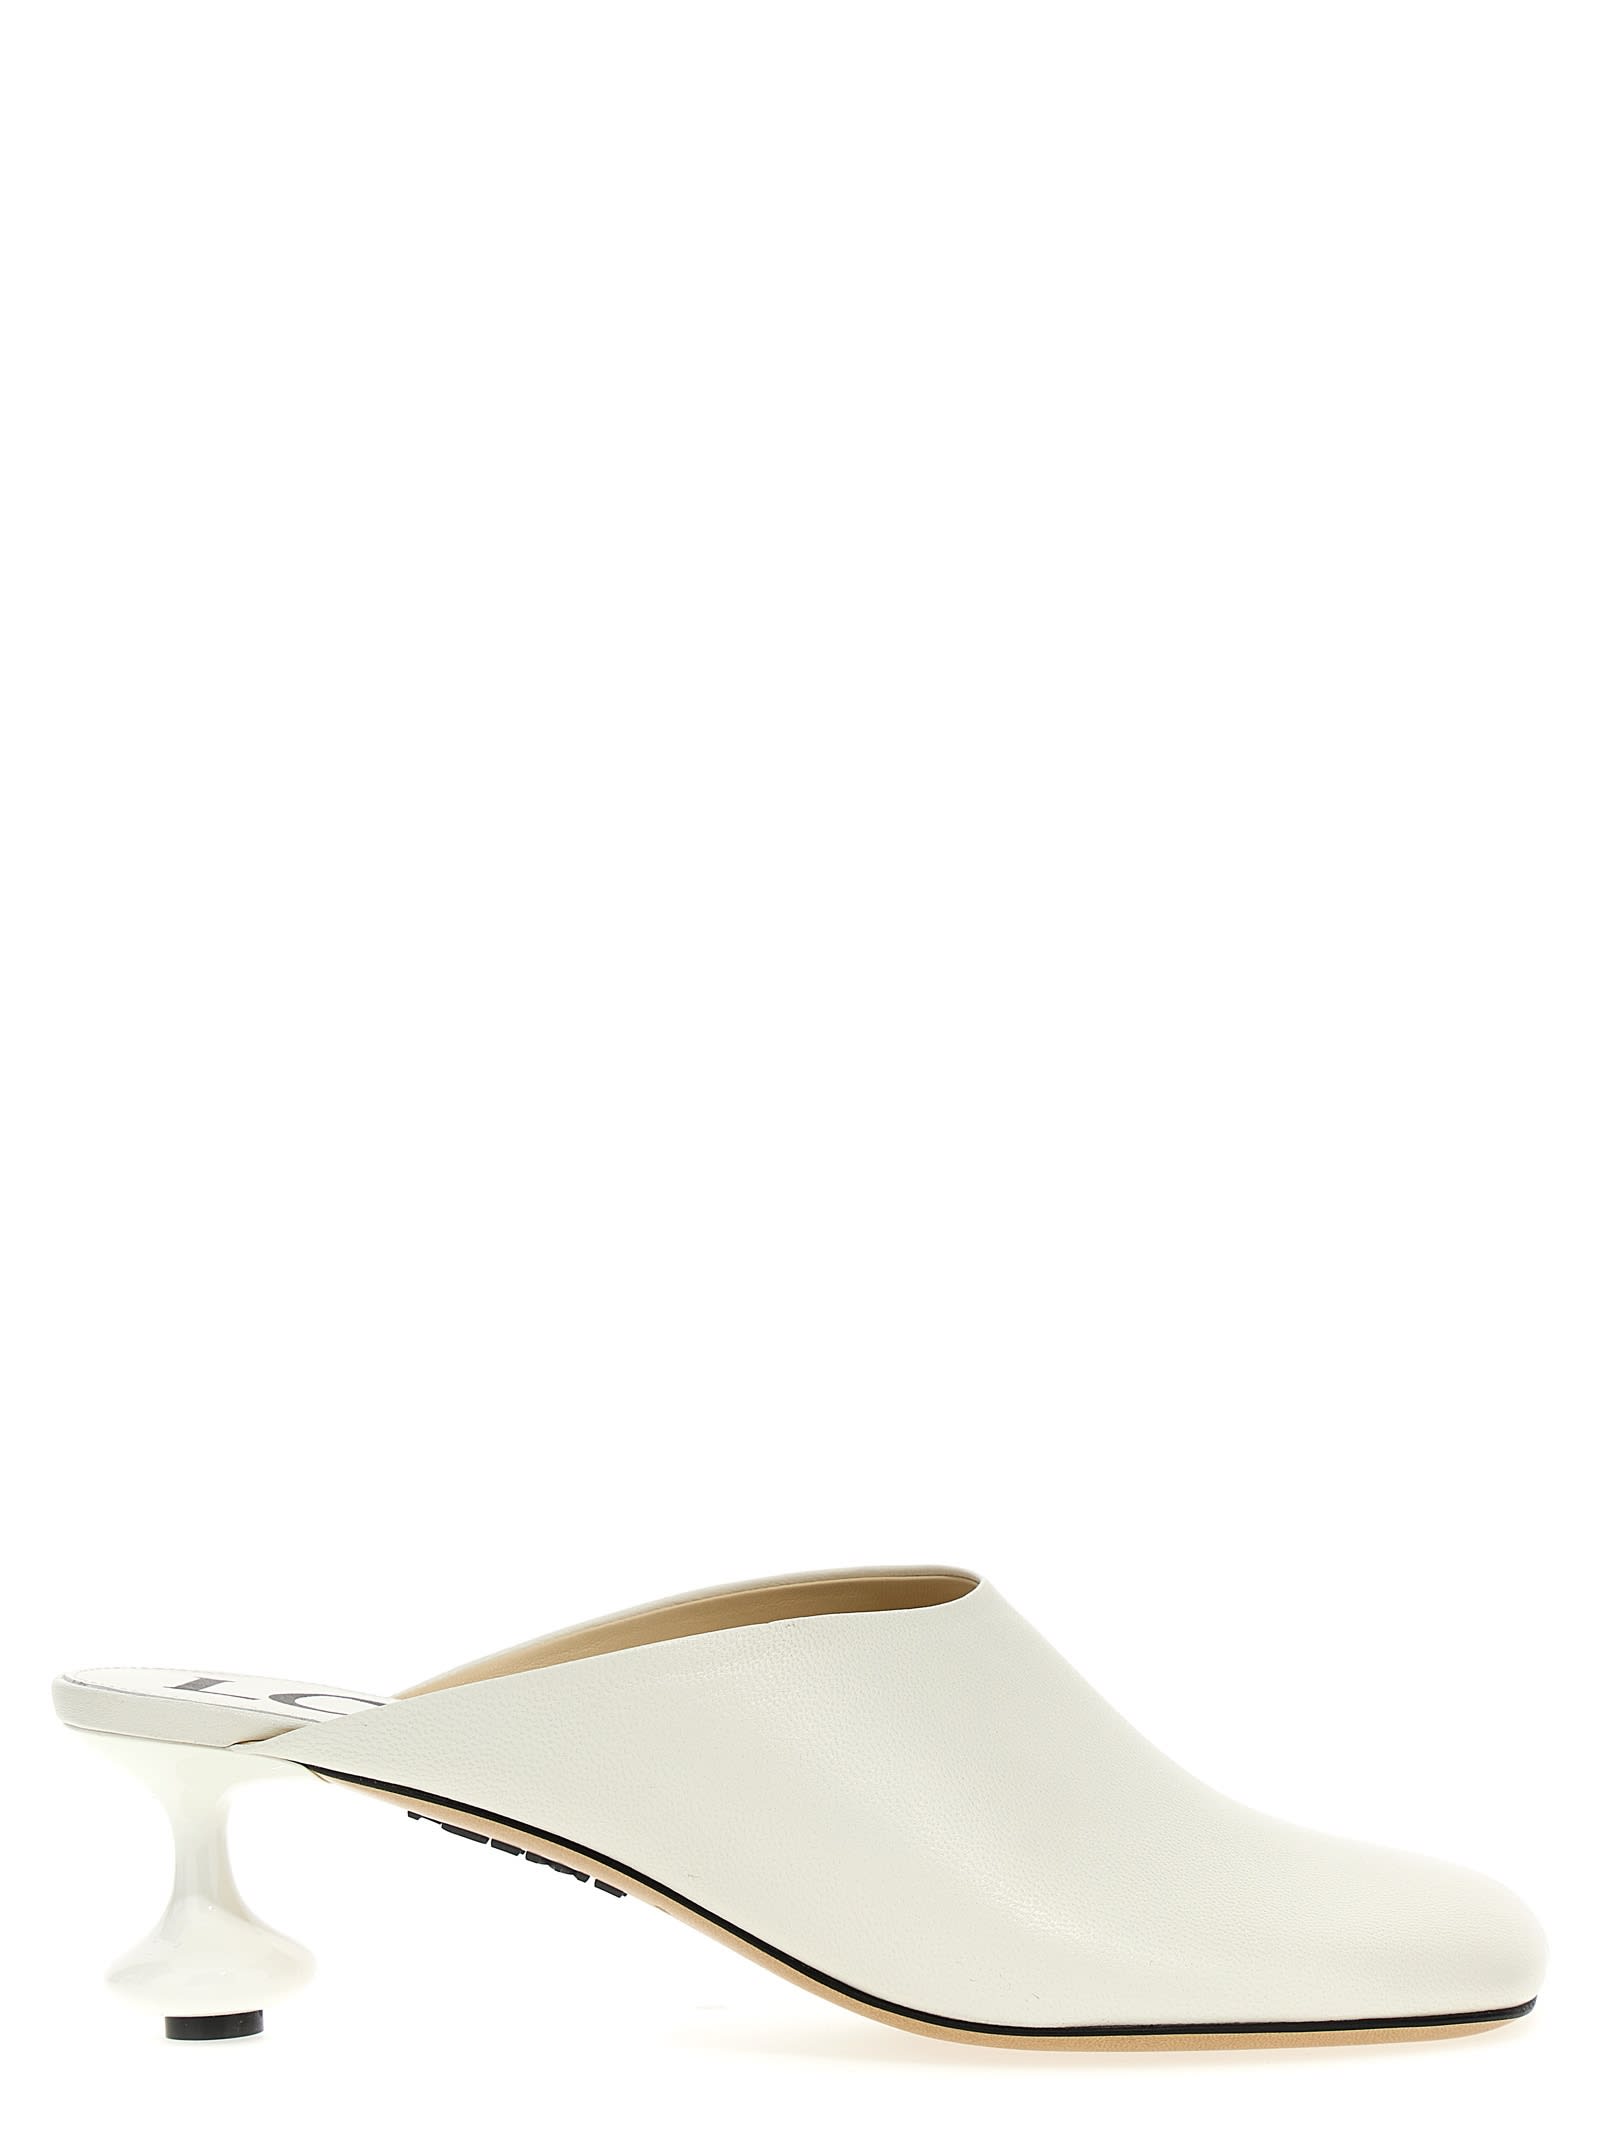 Loewe Toy Mules In White